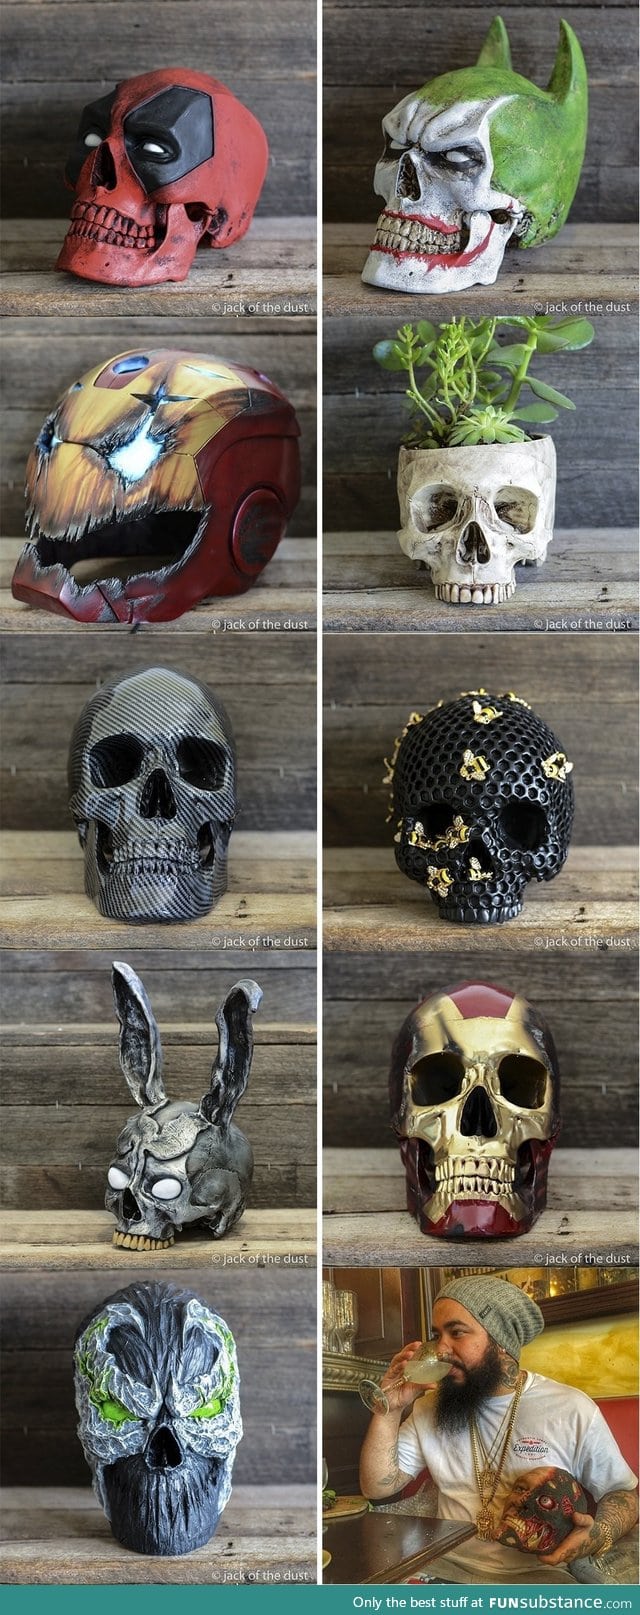 These wooden skull carvings are amazing!